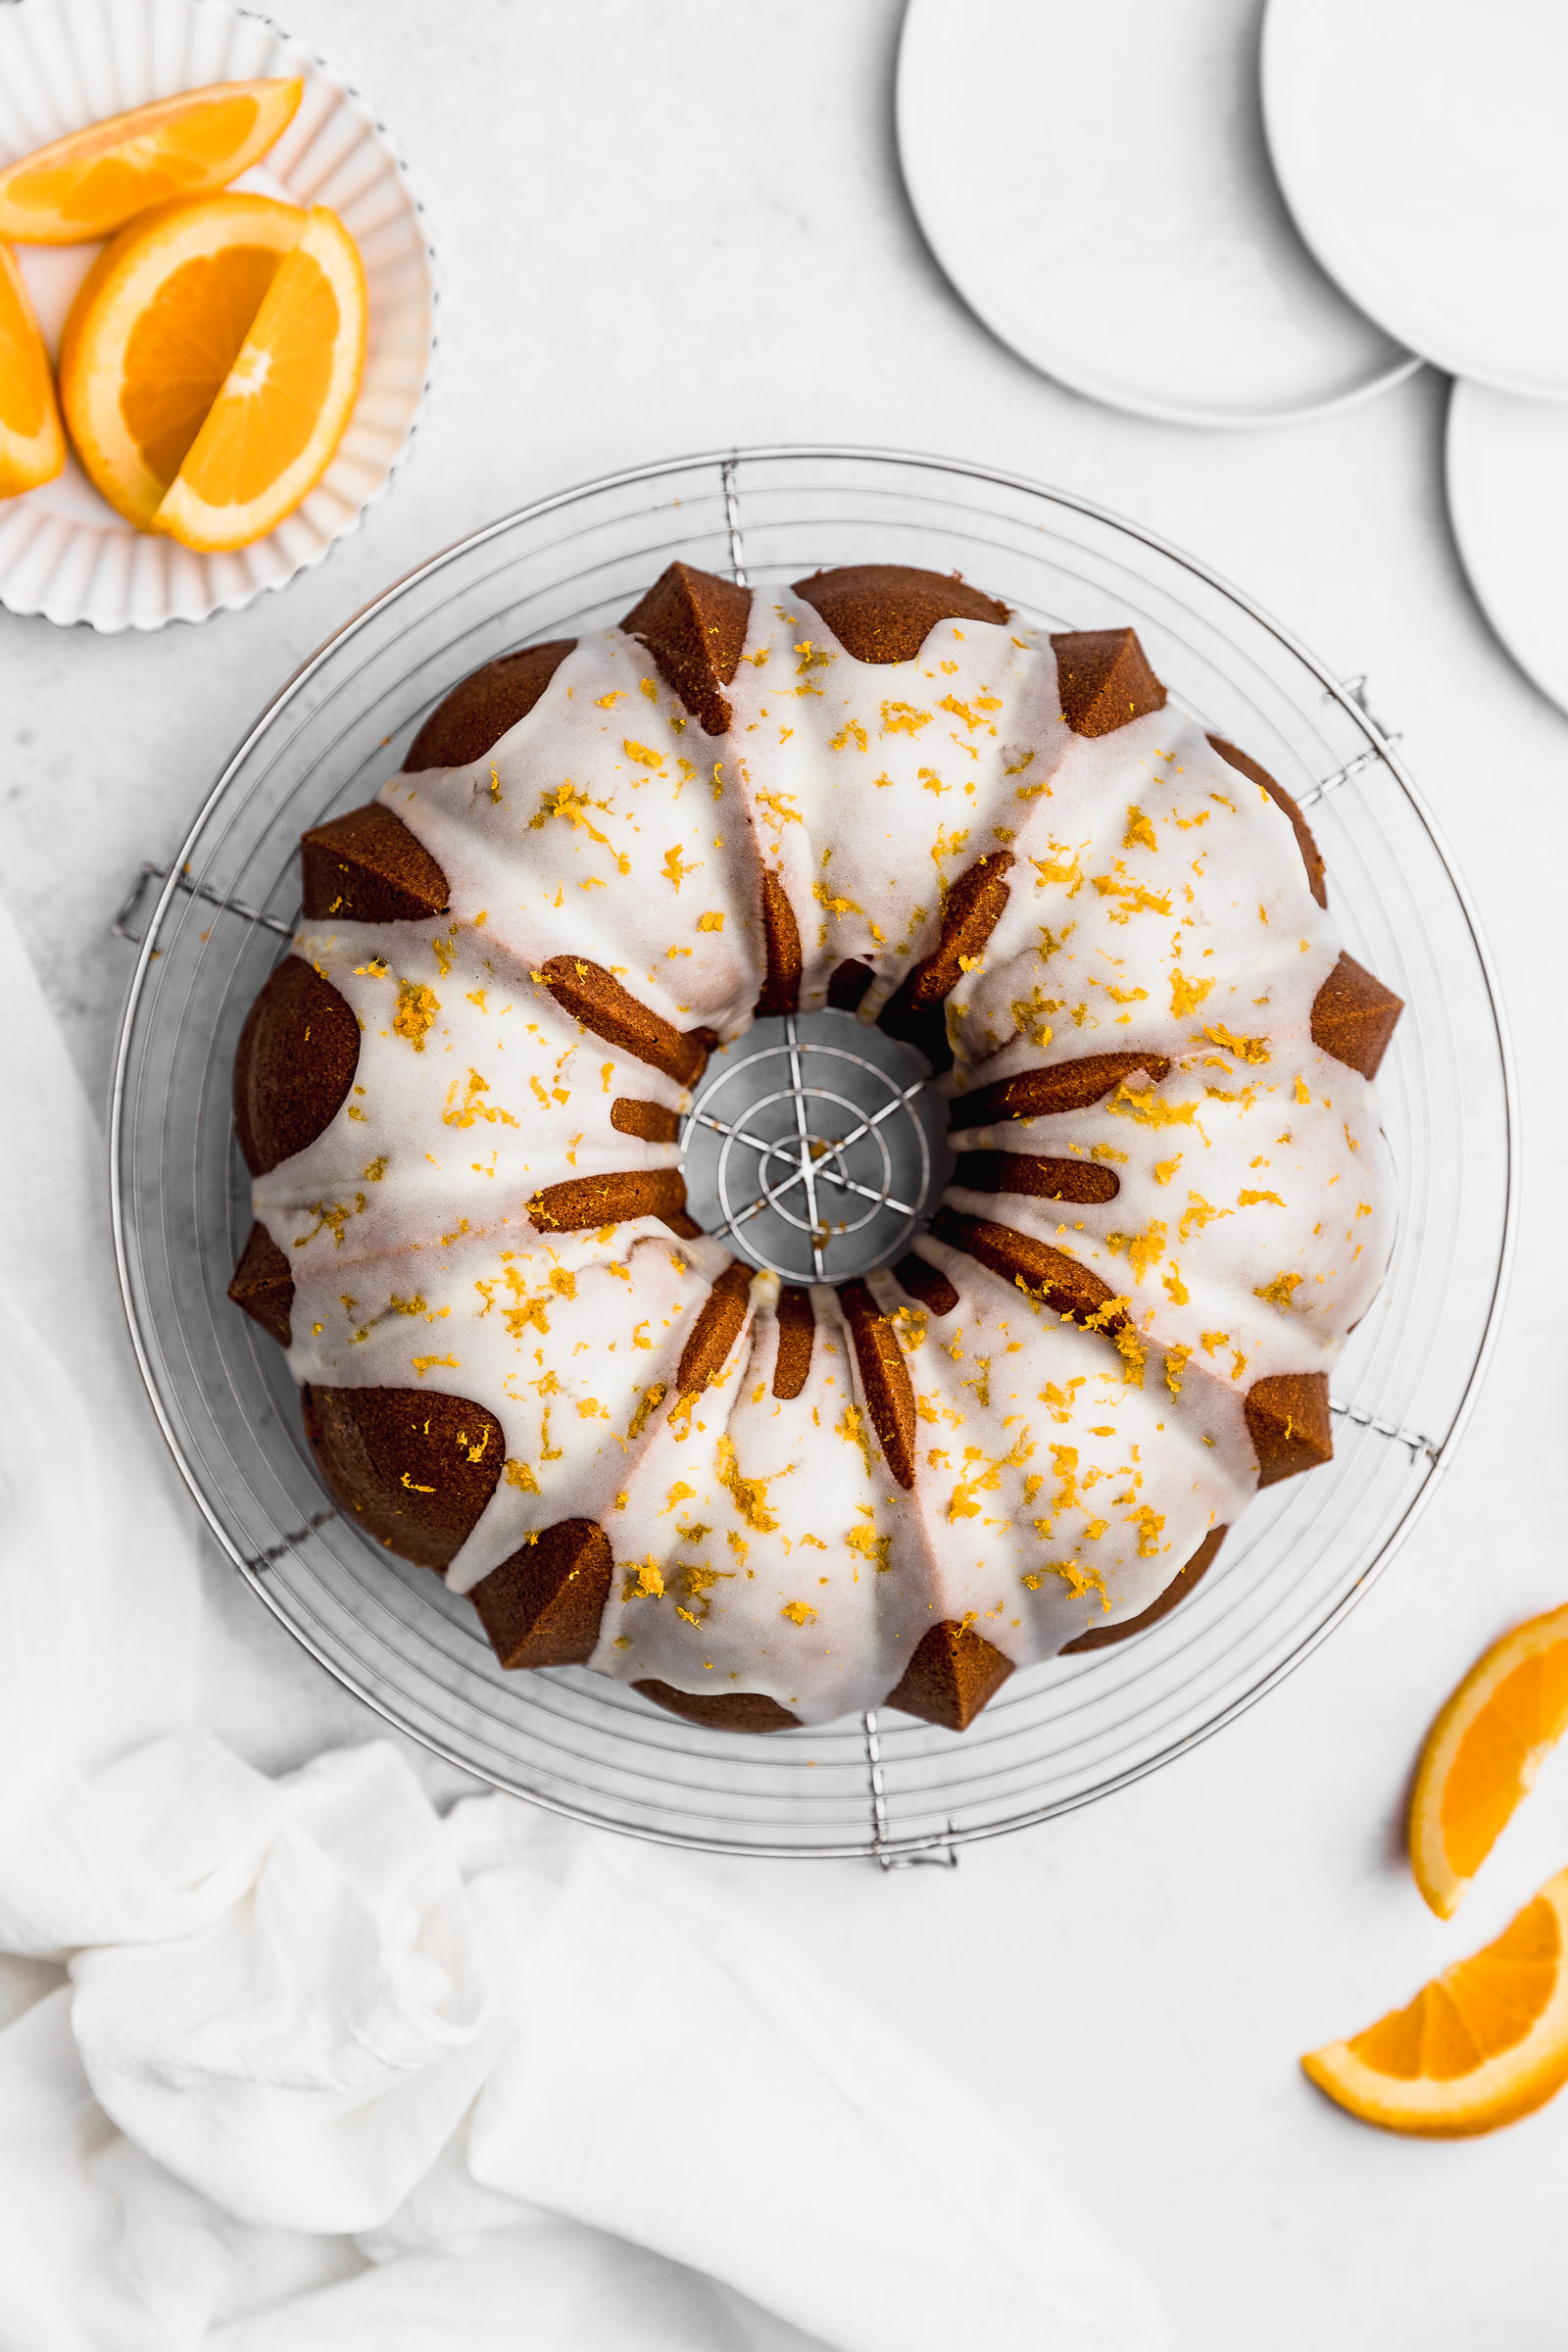 Top View of a whole Orange Bundt Cake, with a white glaze and orange zest on top.